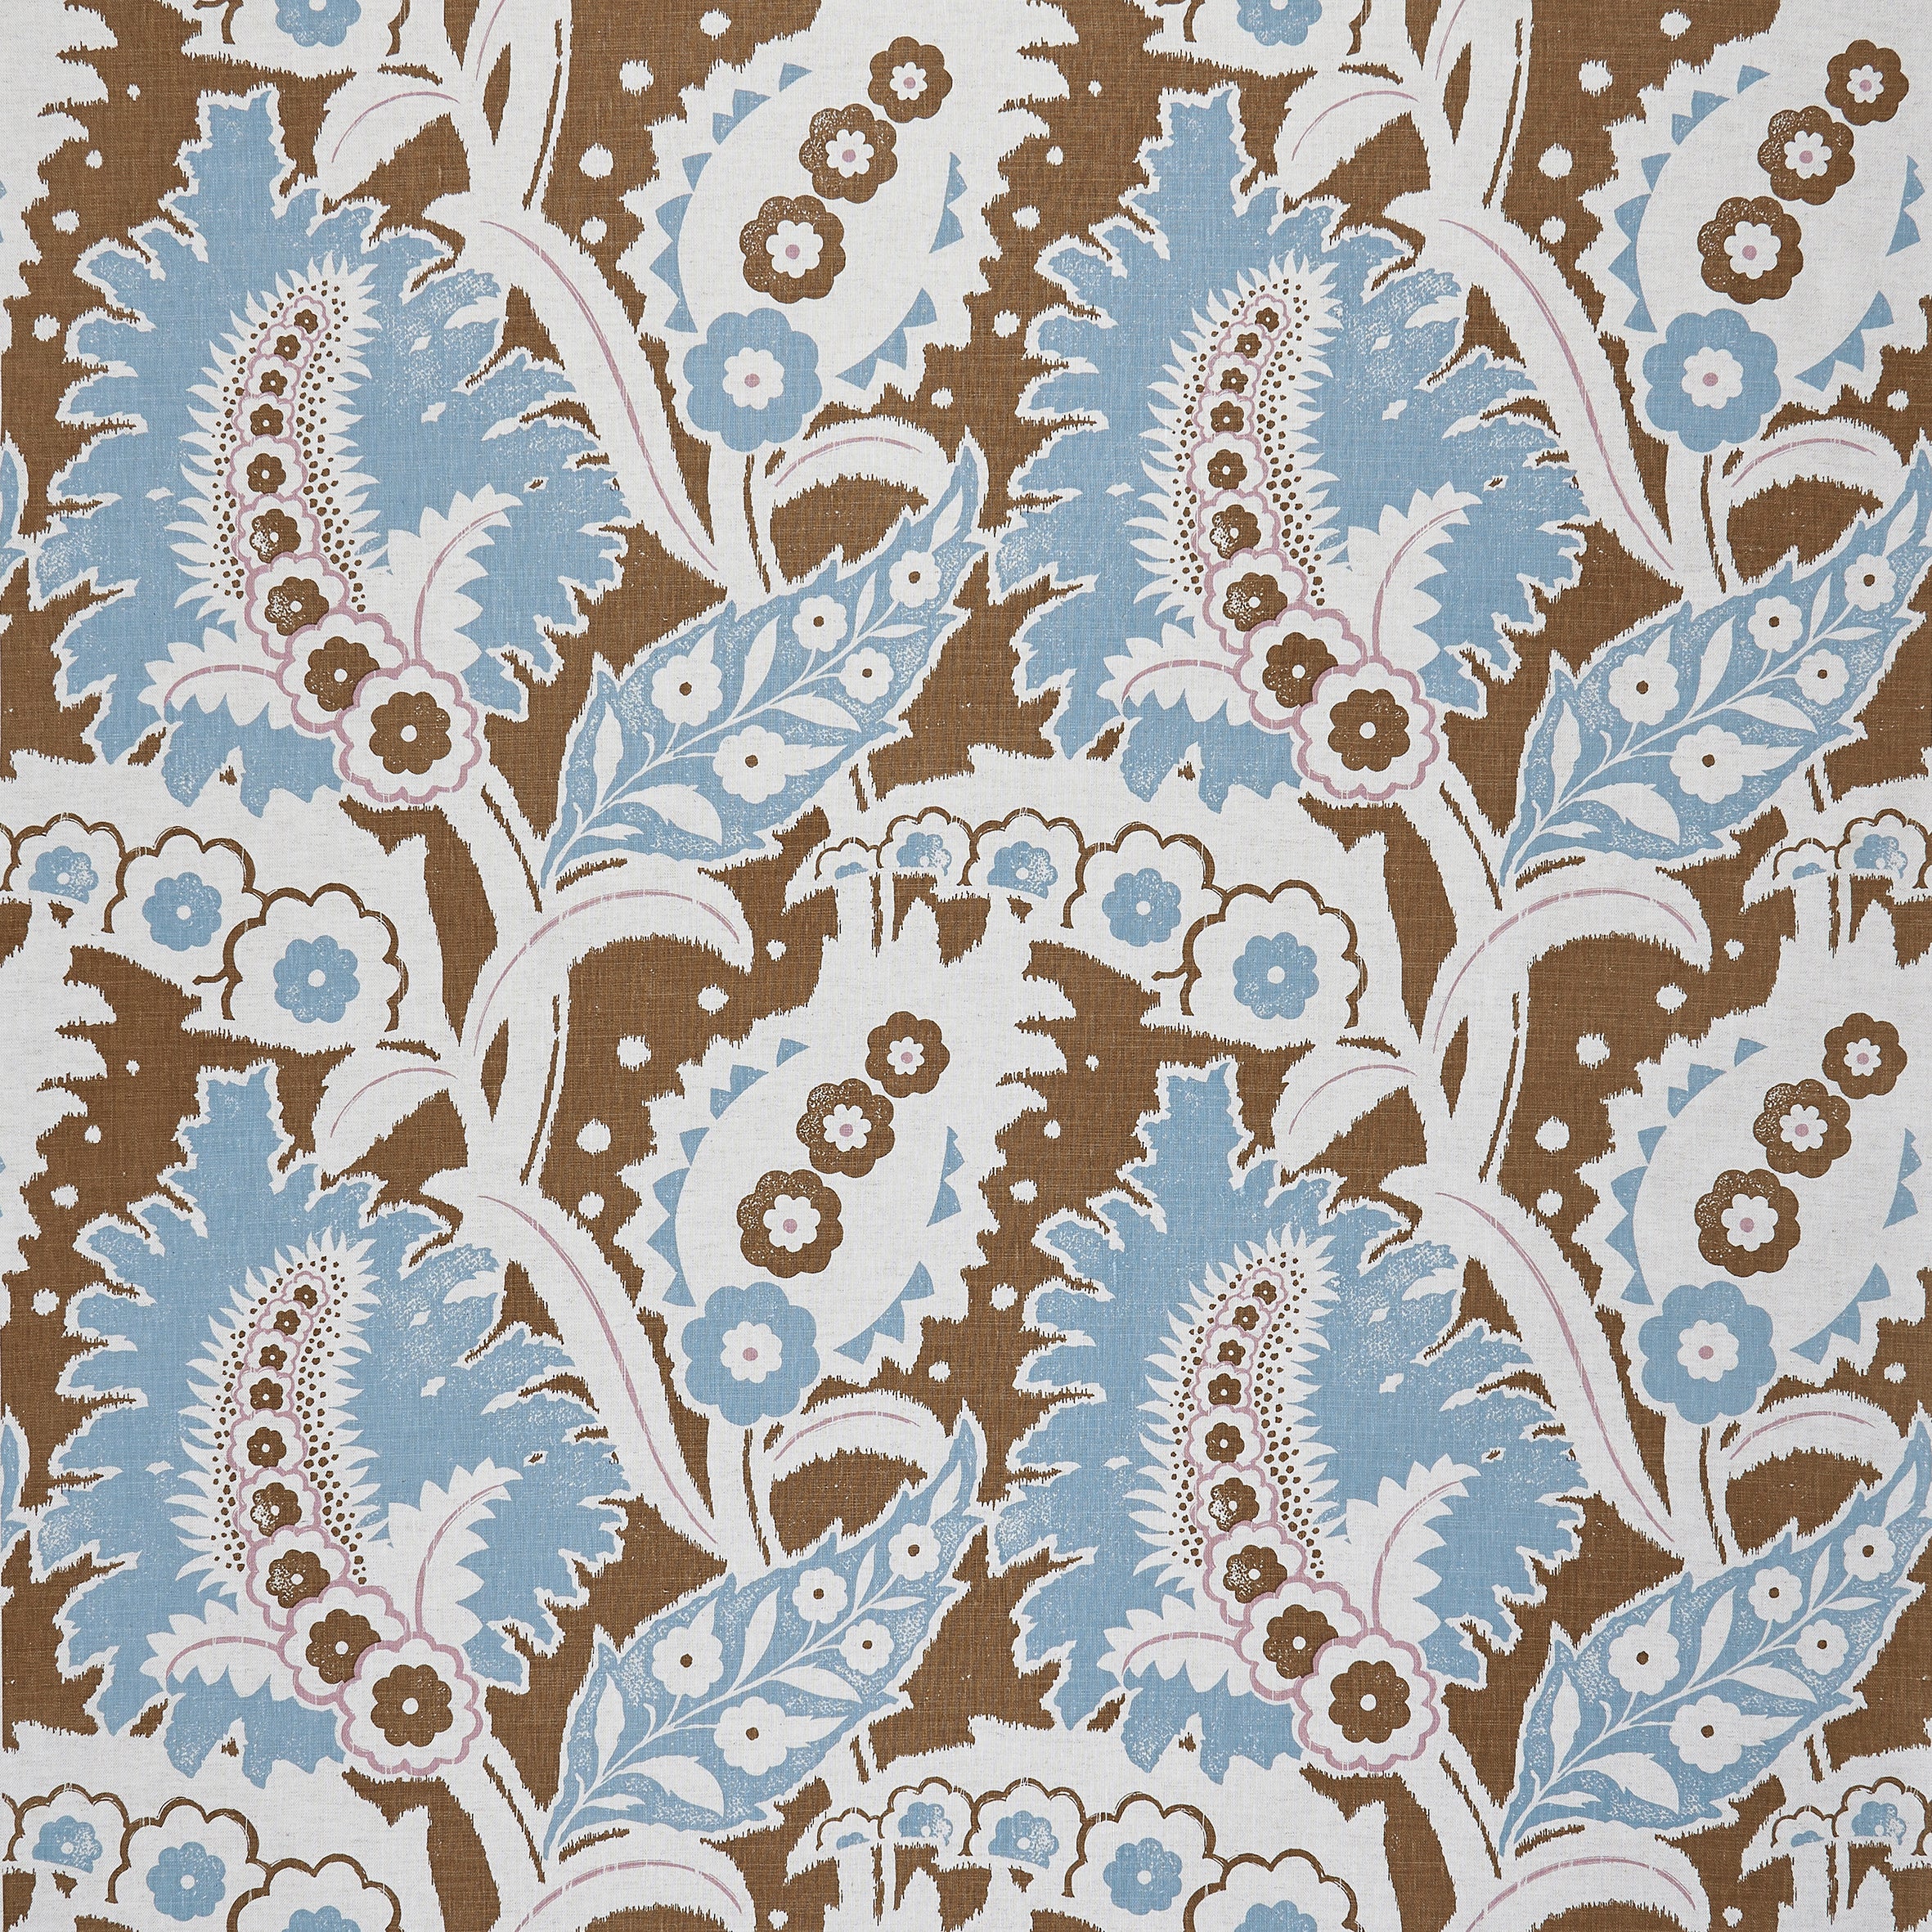 Detail of fabric in a botanical paisley print in shades of white, blue and purple on a brown field.